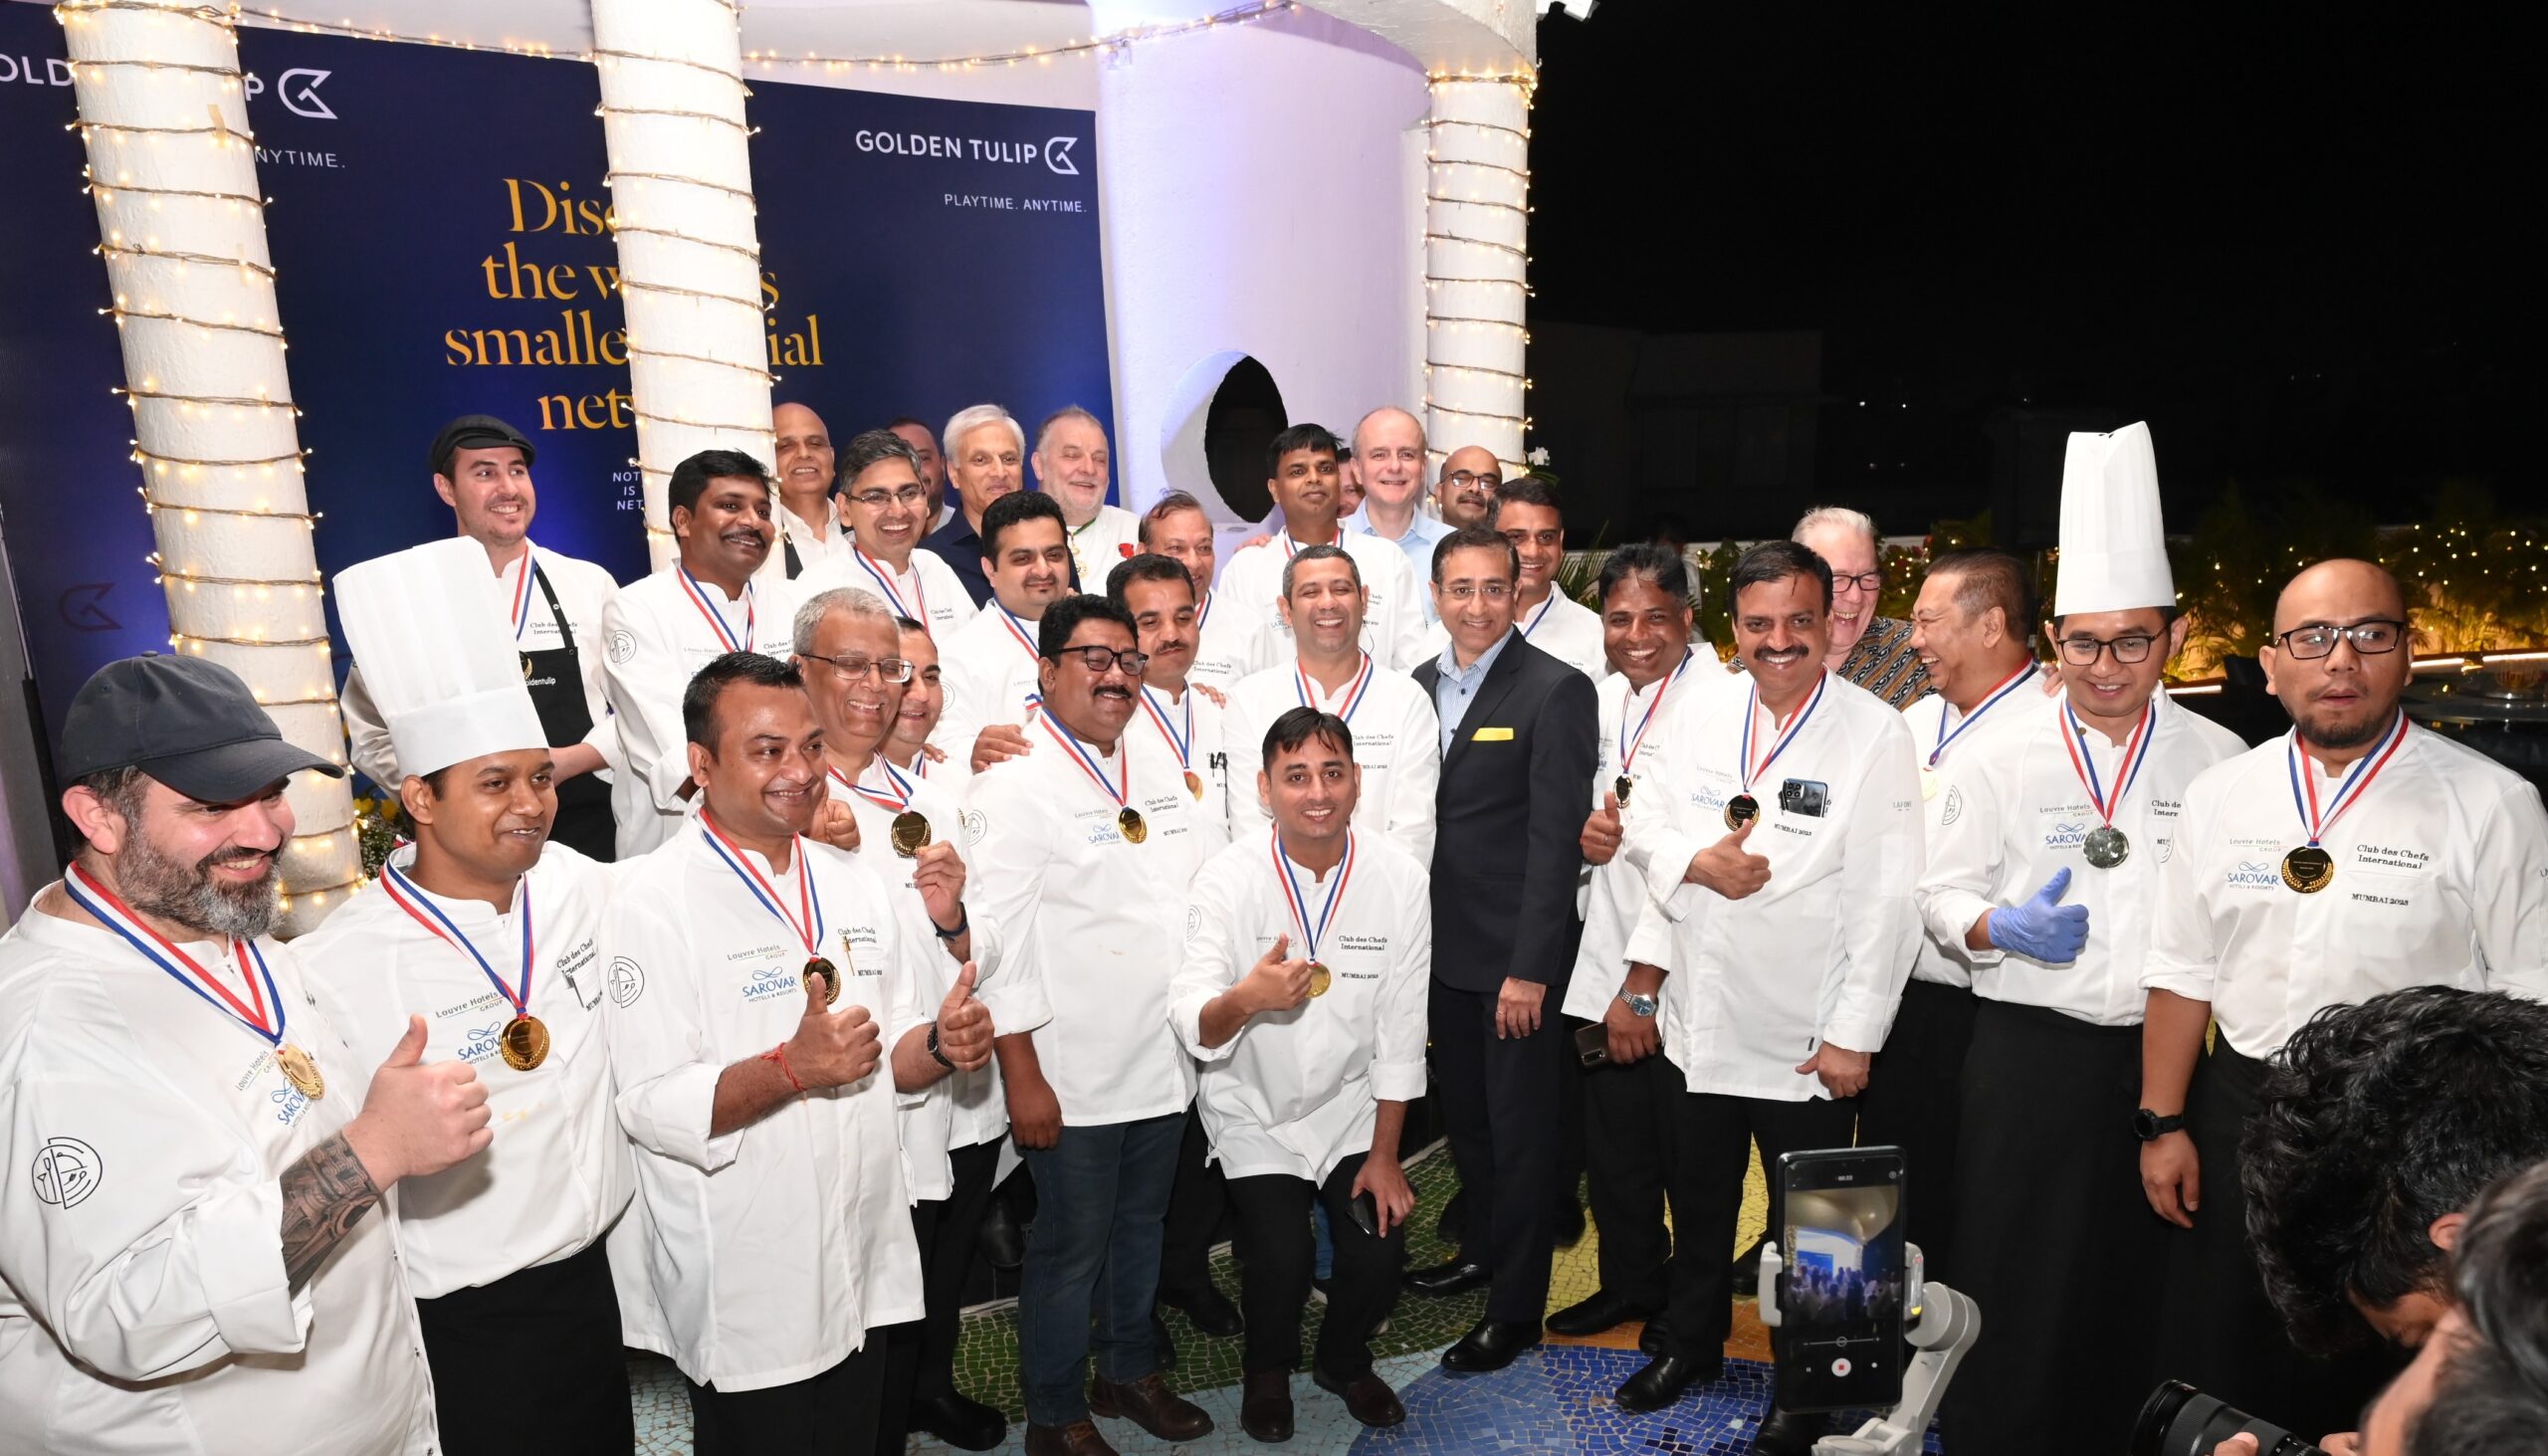 Golden Tulip Launches international culinary event, Club Des Chefs